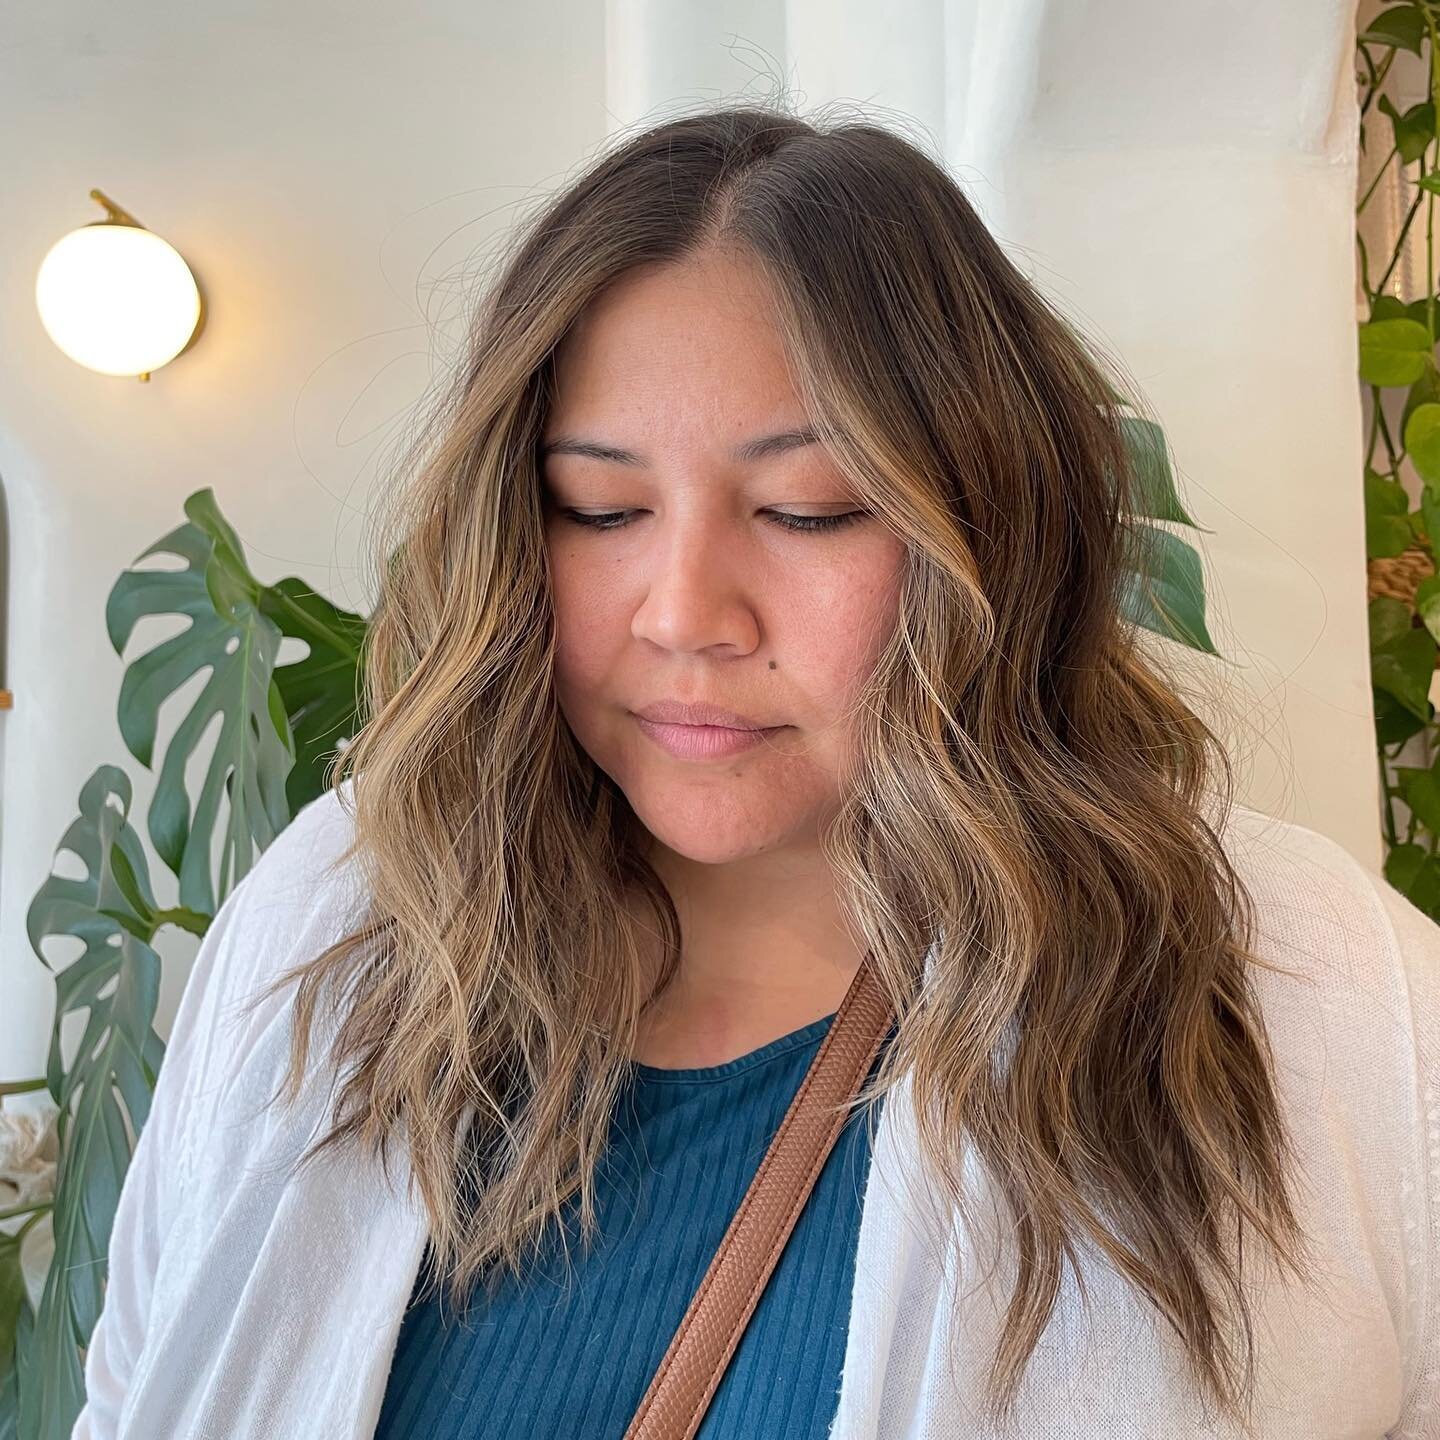 Enhance your brunette with balayage highlights 🤎

Hair by stylist @sofiaa.nolasco 🫶🏽

Check out our online booking using our bio link to book a balayage appointment or you can call or text the salon phone 📱 click the contact button on our page ✨
